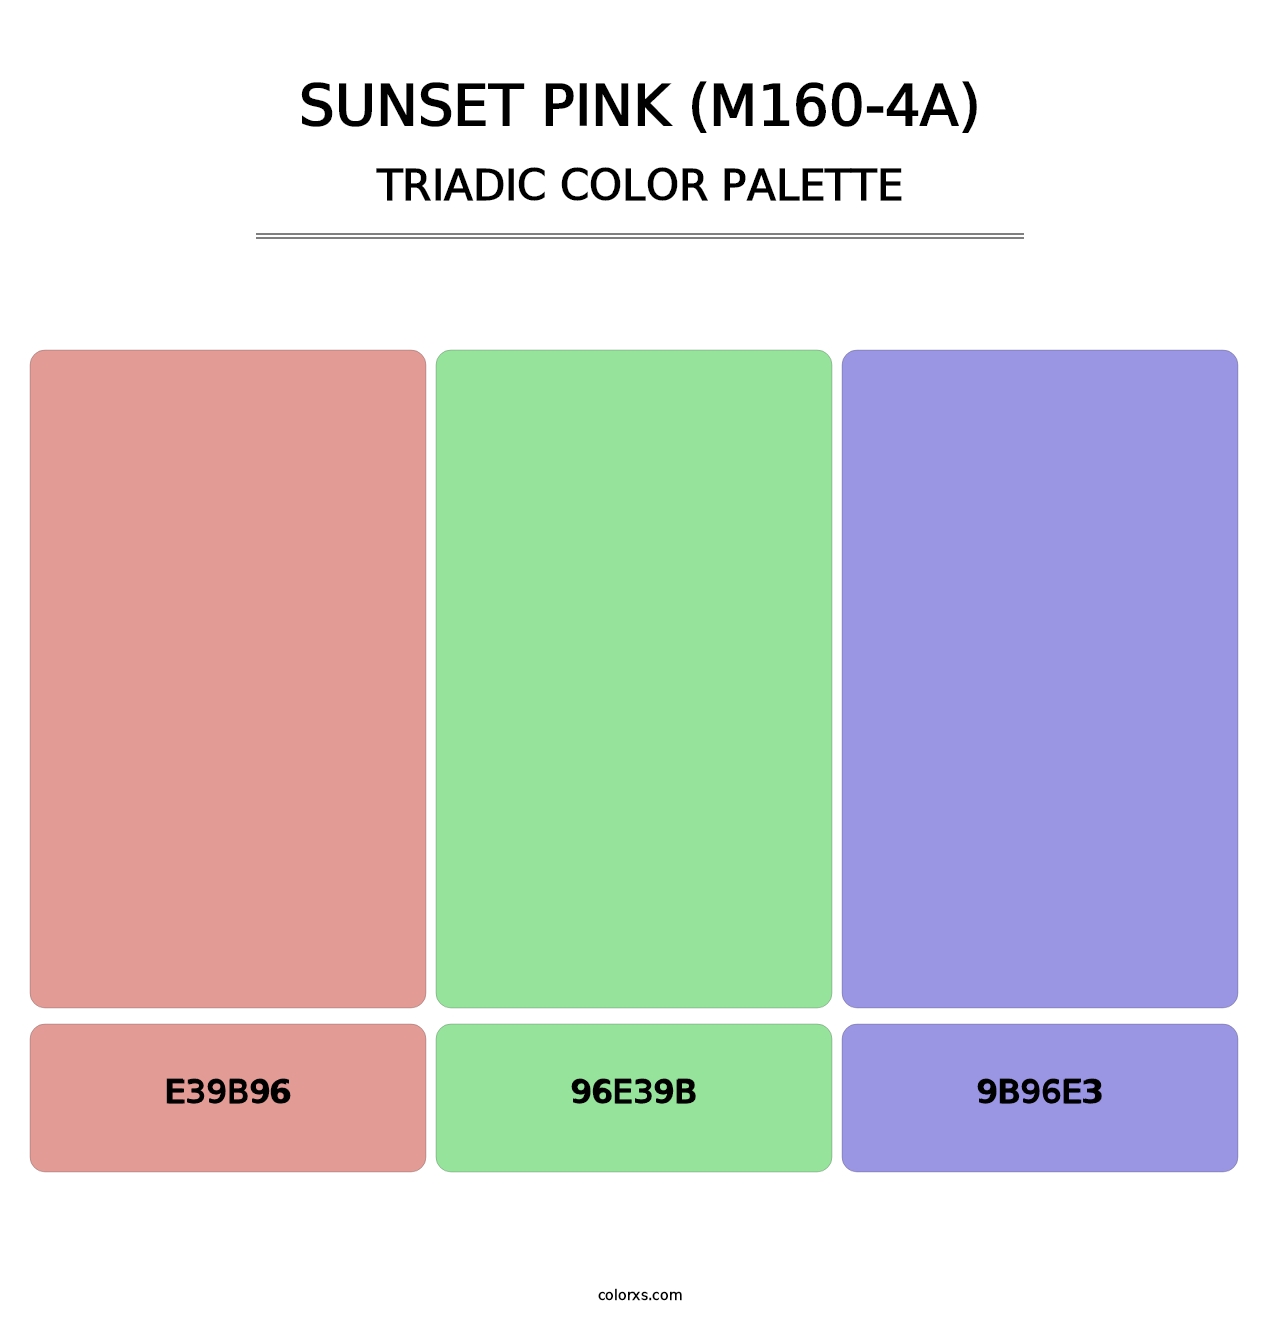 Sunset Pink (M160-4A) - Triadic Color Palette